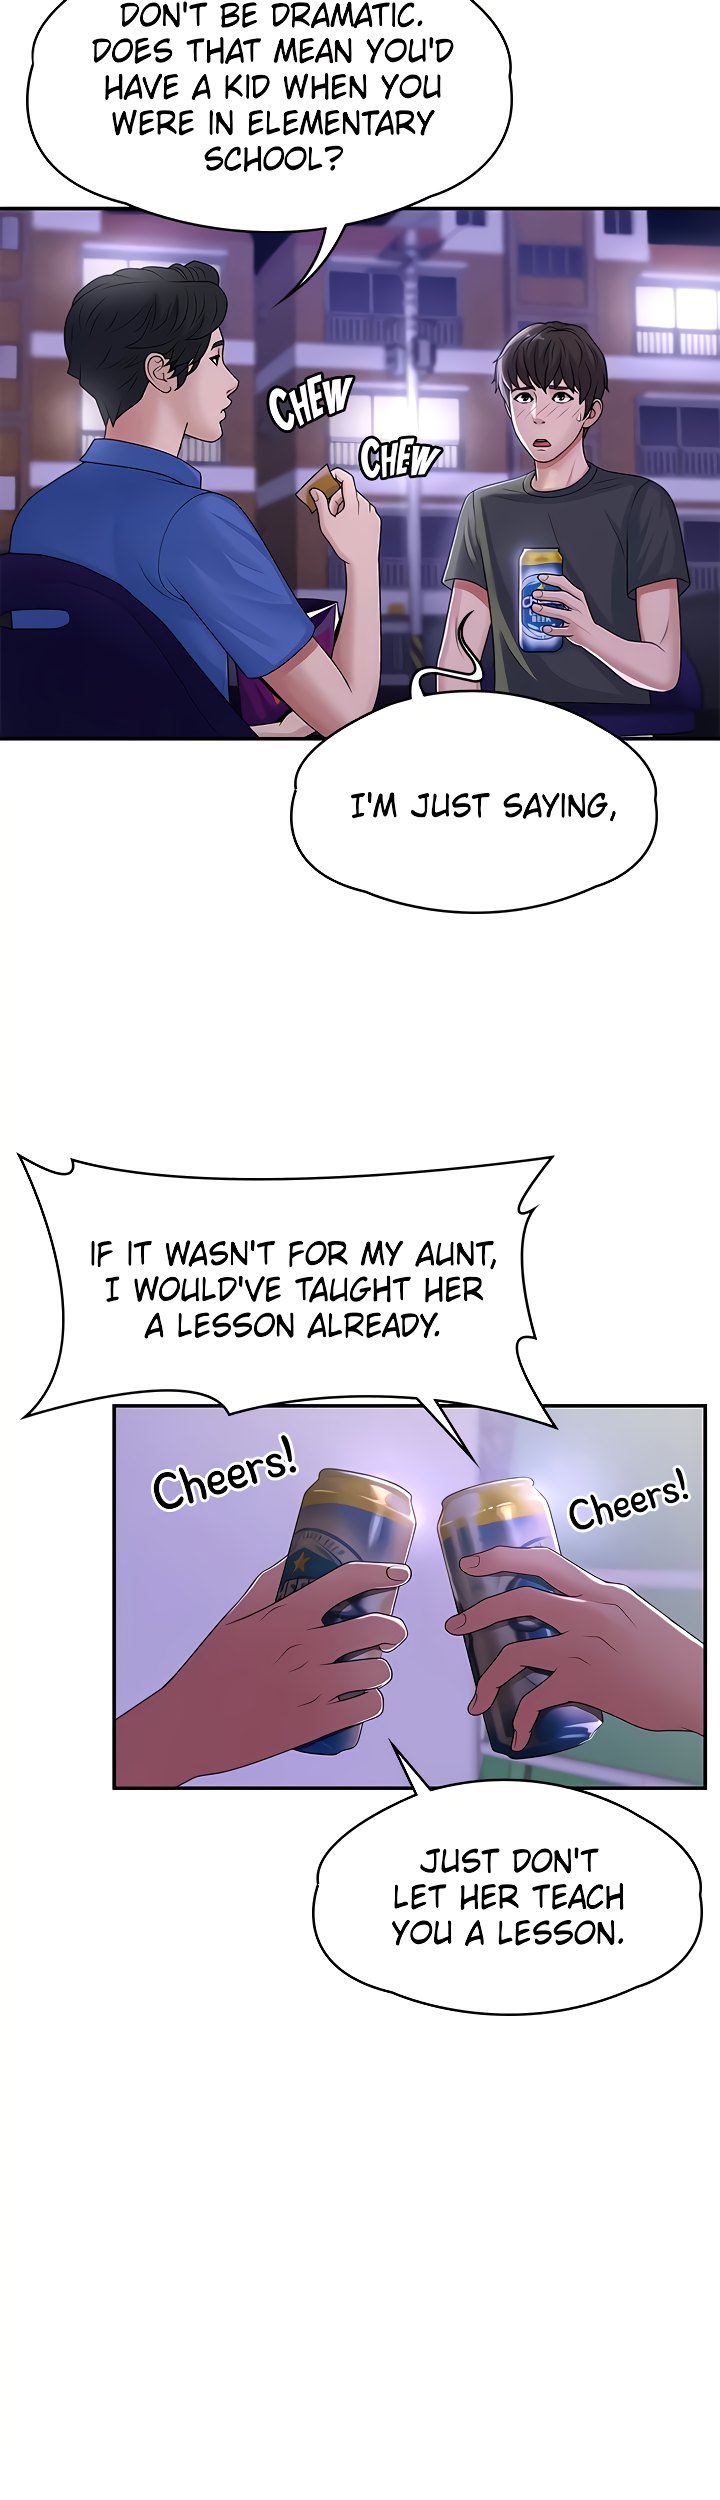 My Aunt in Puberty - Chapter 3 Page 26